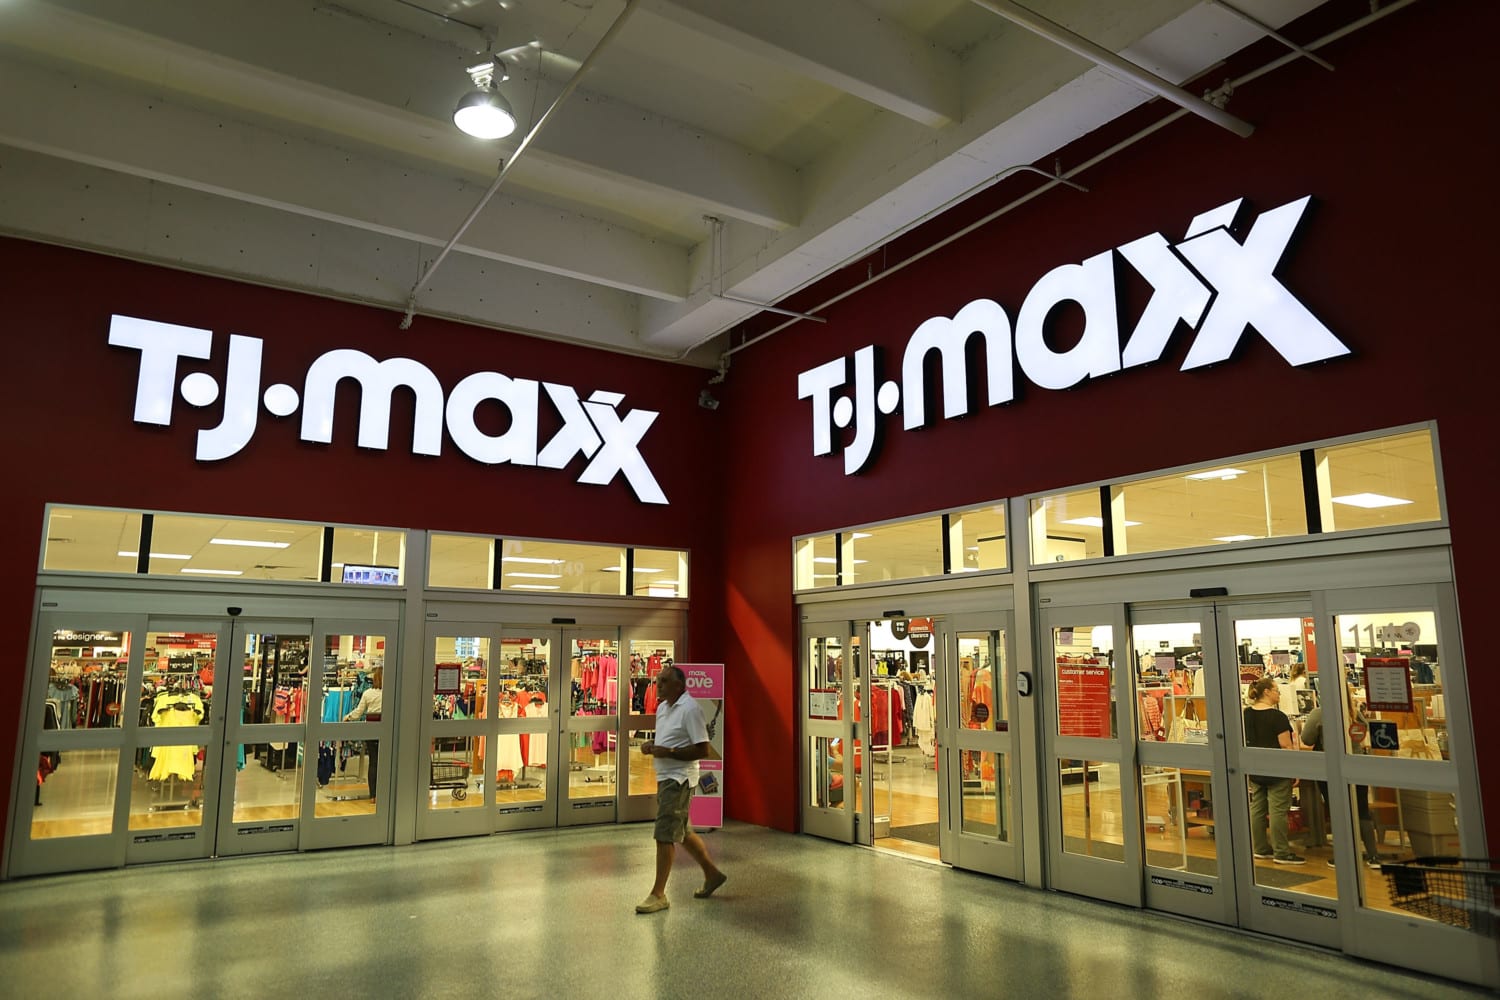 10 Things You Probably Didn't Know About Shopping At T.J. Maxx